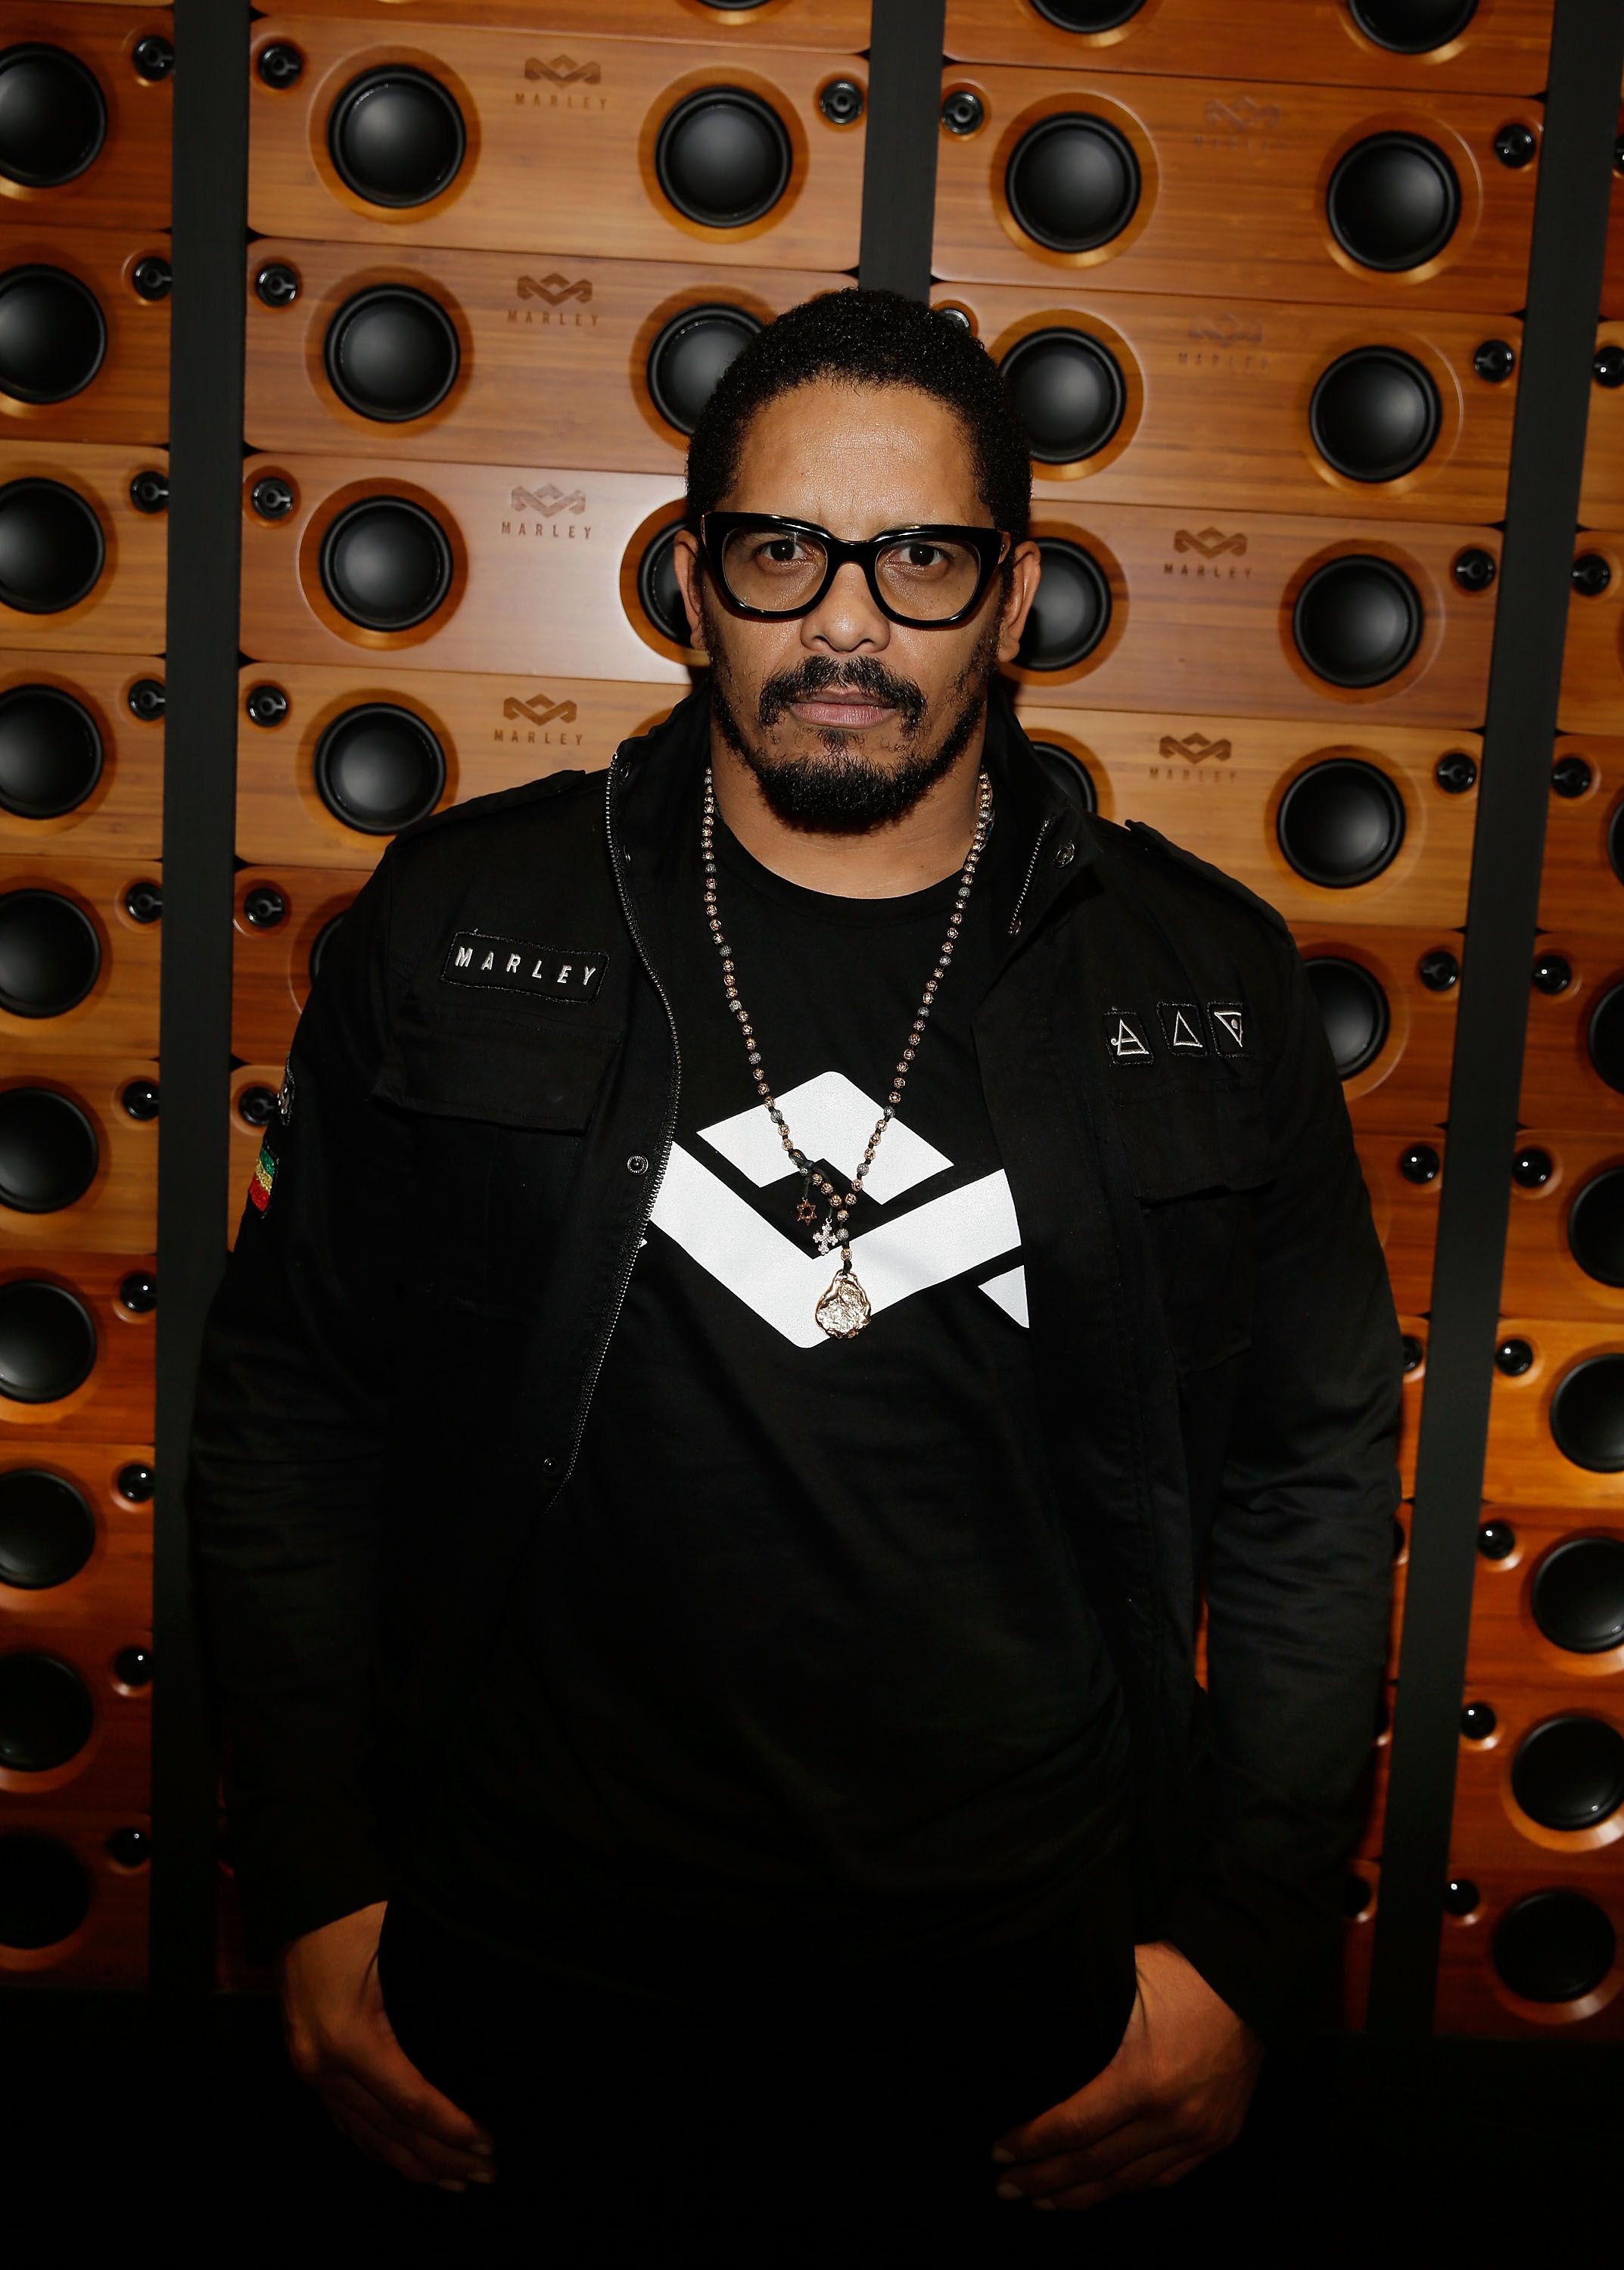 Rohan Marley at the House of Marley booth during the International Consumer Electronics Show at the Las Vegas Convention Center on January 6, 2015 in Las Vegas, Nevada | Photo: Getty Images